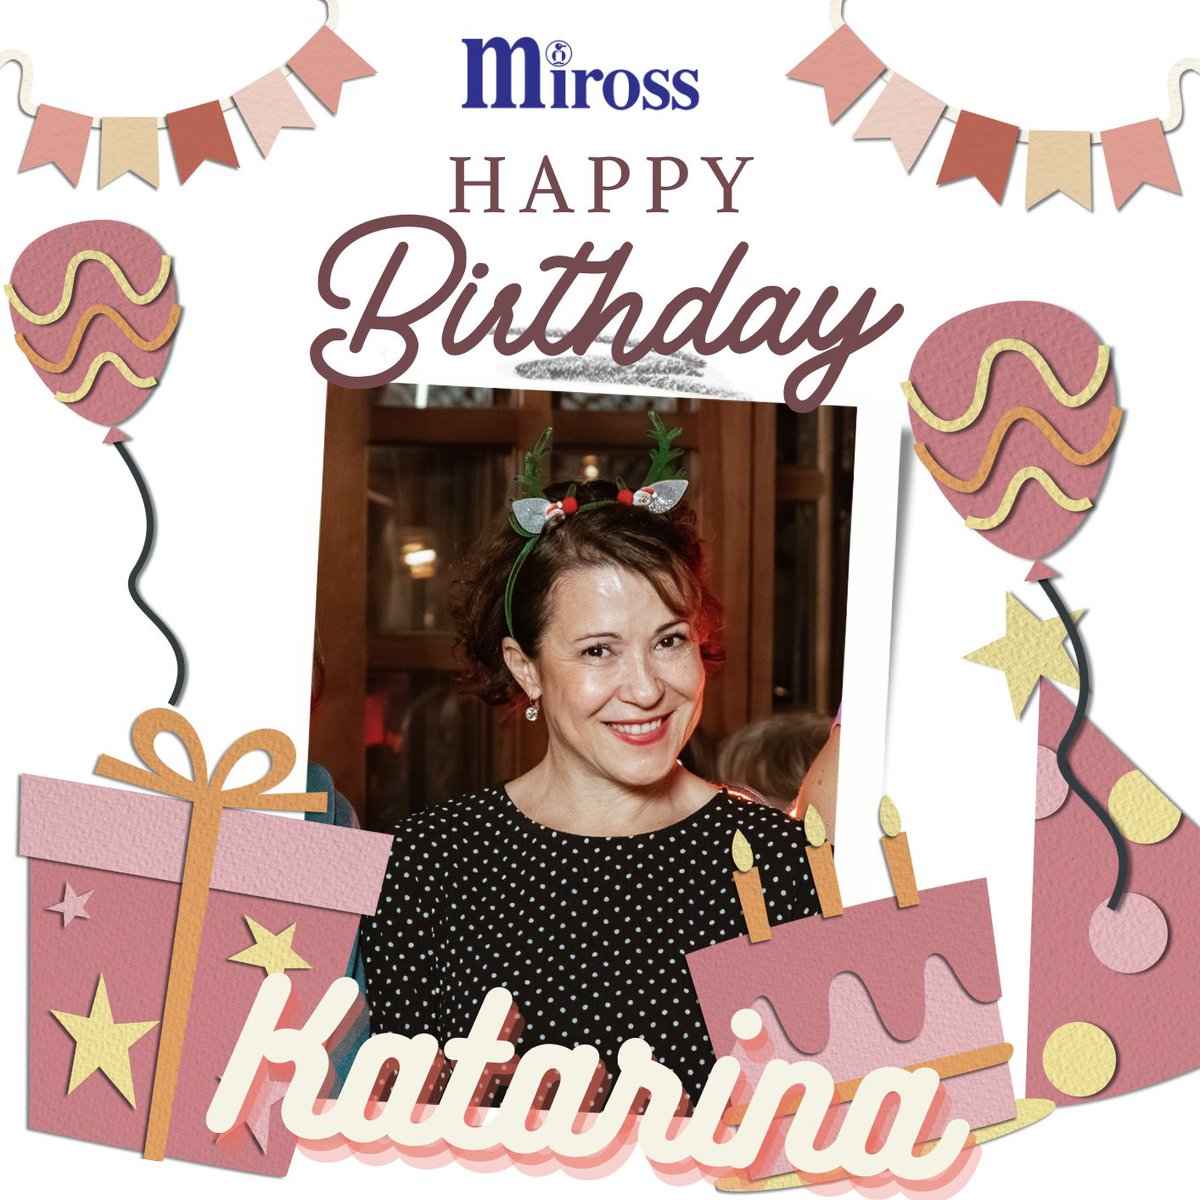 Happy birthday to our dear Katarina 🎁🎉

We wish You all the best🎈🎊🎂
.
.
#miross #top100mostinfluential #top100event #top100eventagency #eventex #netzeroevents #eventexperience #netzero  #netzerocarbon  #pcm #pco #dmc #eventindustry #icca 
#liveevents #hybridevents